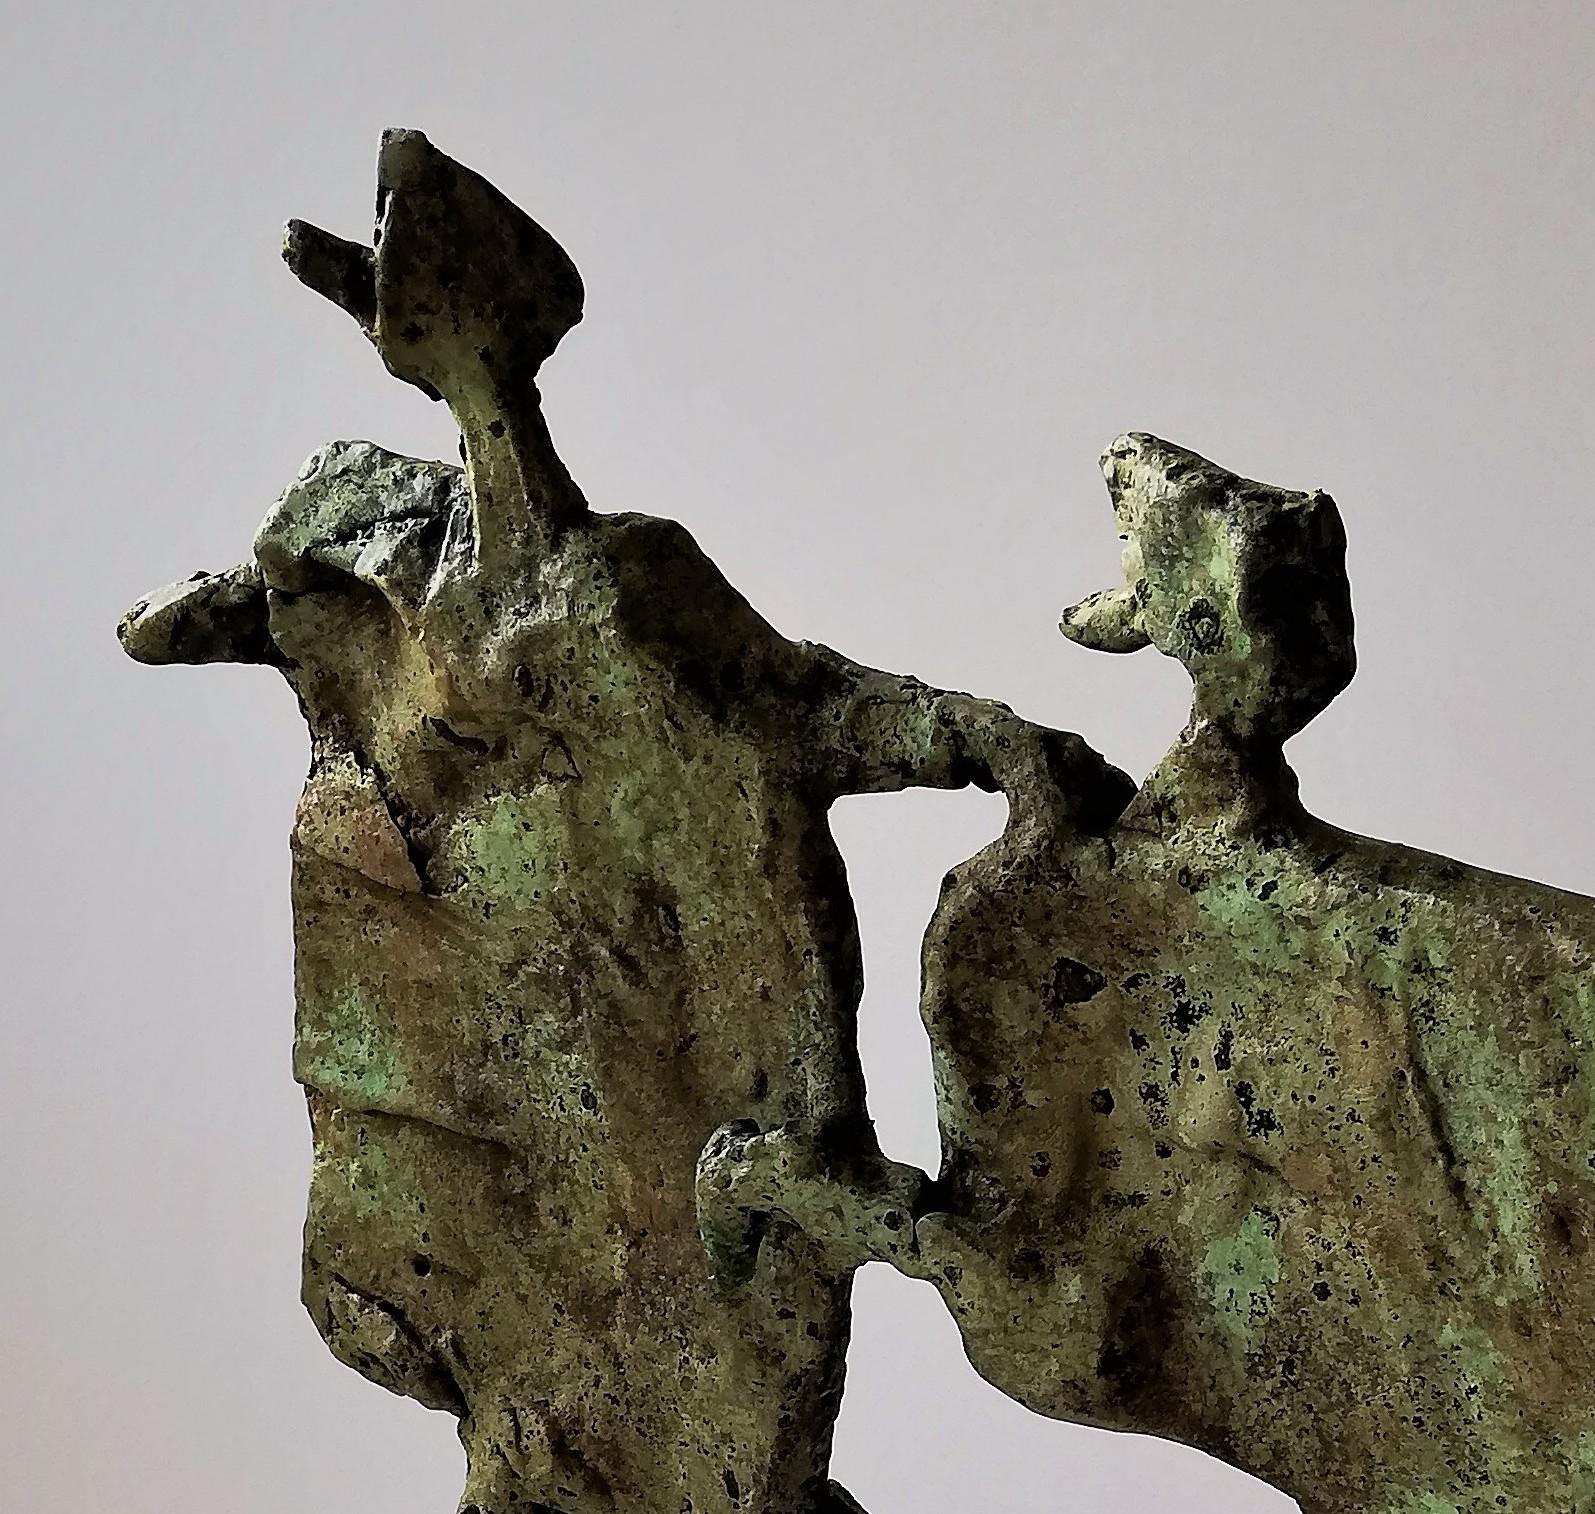 A unique bronze sculpture by contemporary British sculptor Neil Wood. 'Running Together' is one of a kind bronze measuring 29x26x14cm from Neil Wood's 'Refugee' collection. 

Neil Wood has been a practicing professional sculptor and fine artist for